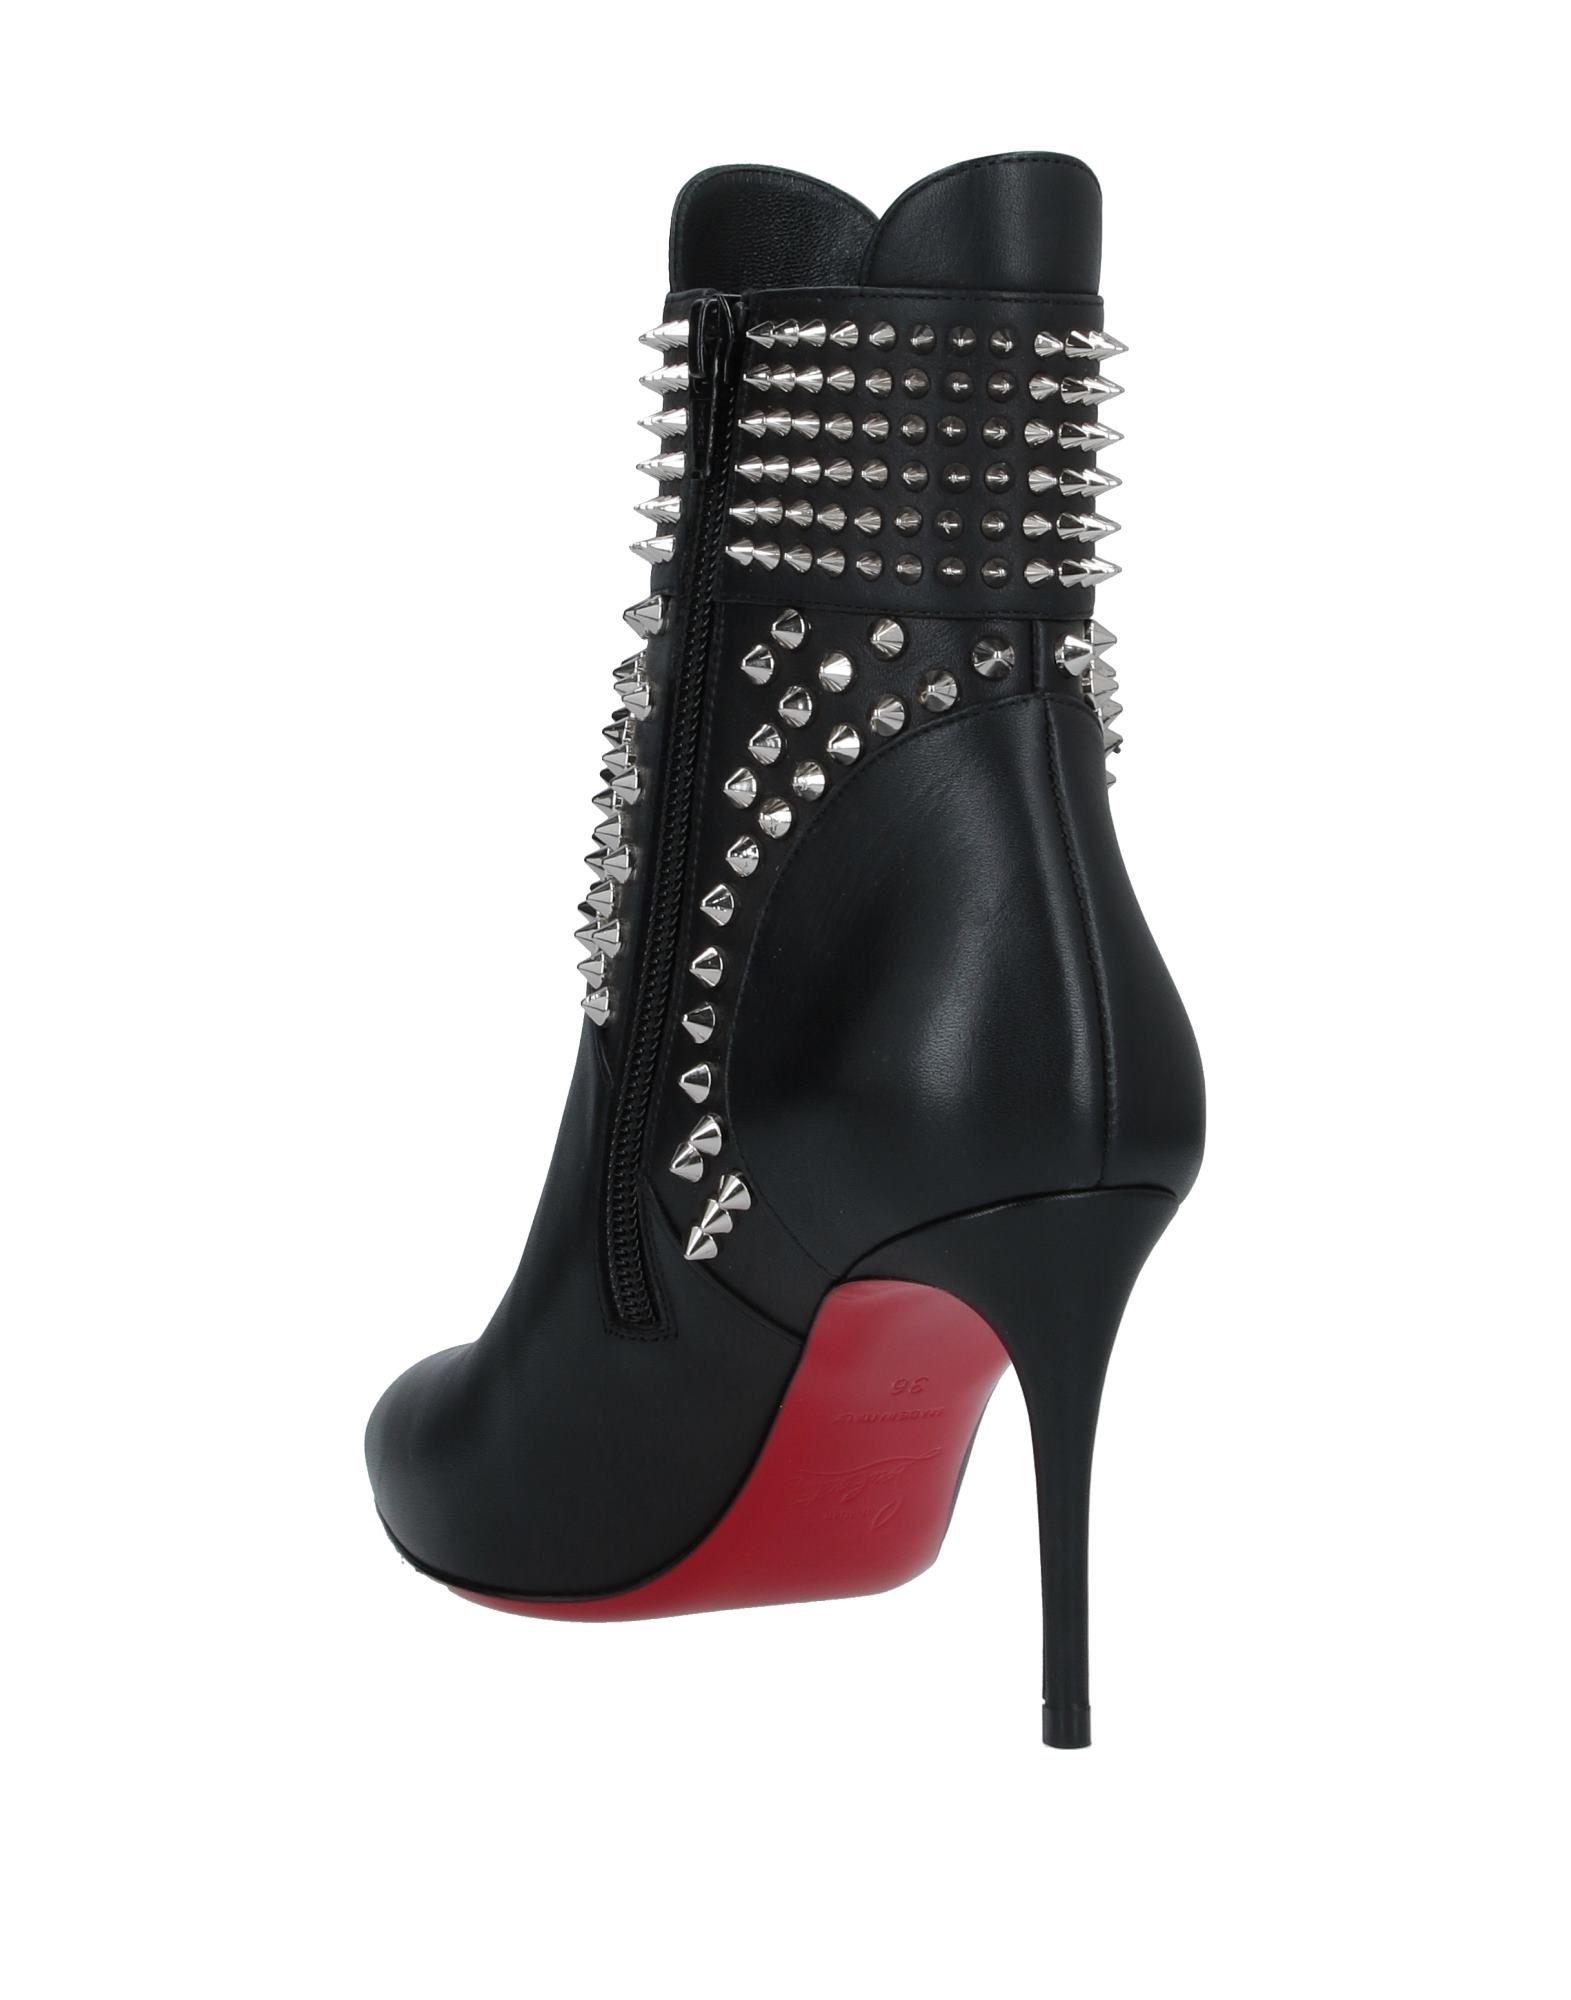 Authentic NEW Christian Louboutin Black Calf Leather Hongroise 85 Studded  Boots Size 37